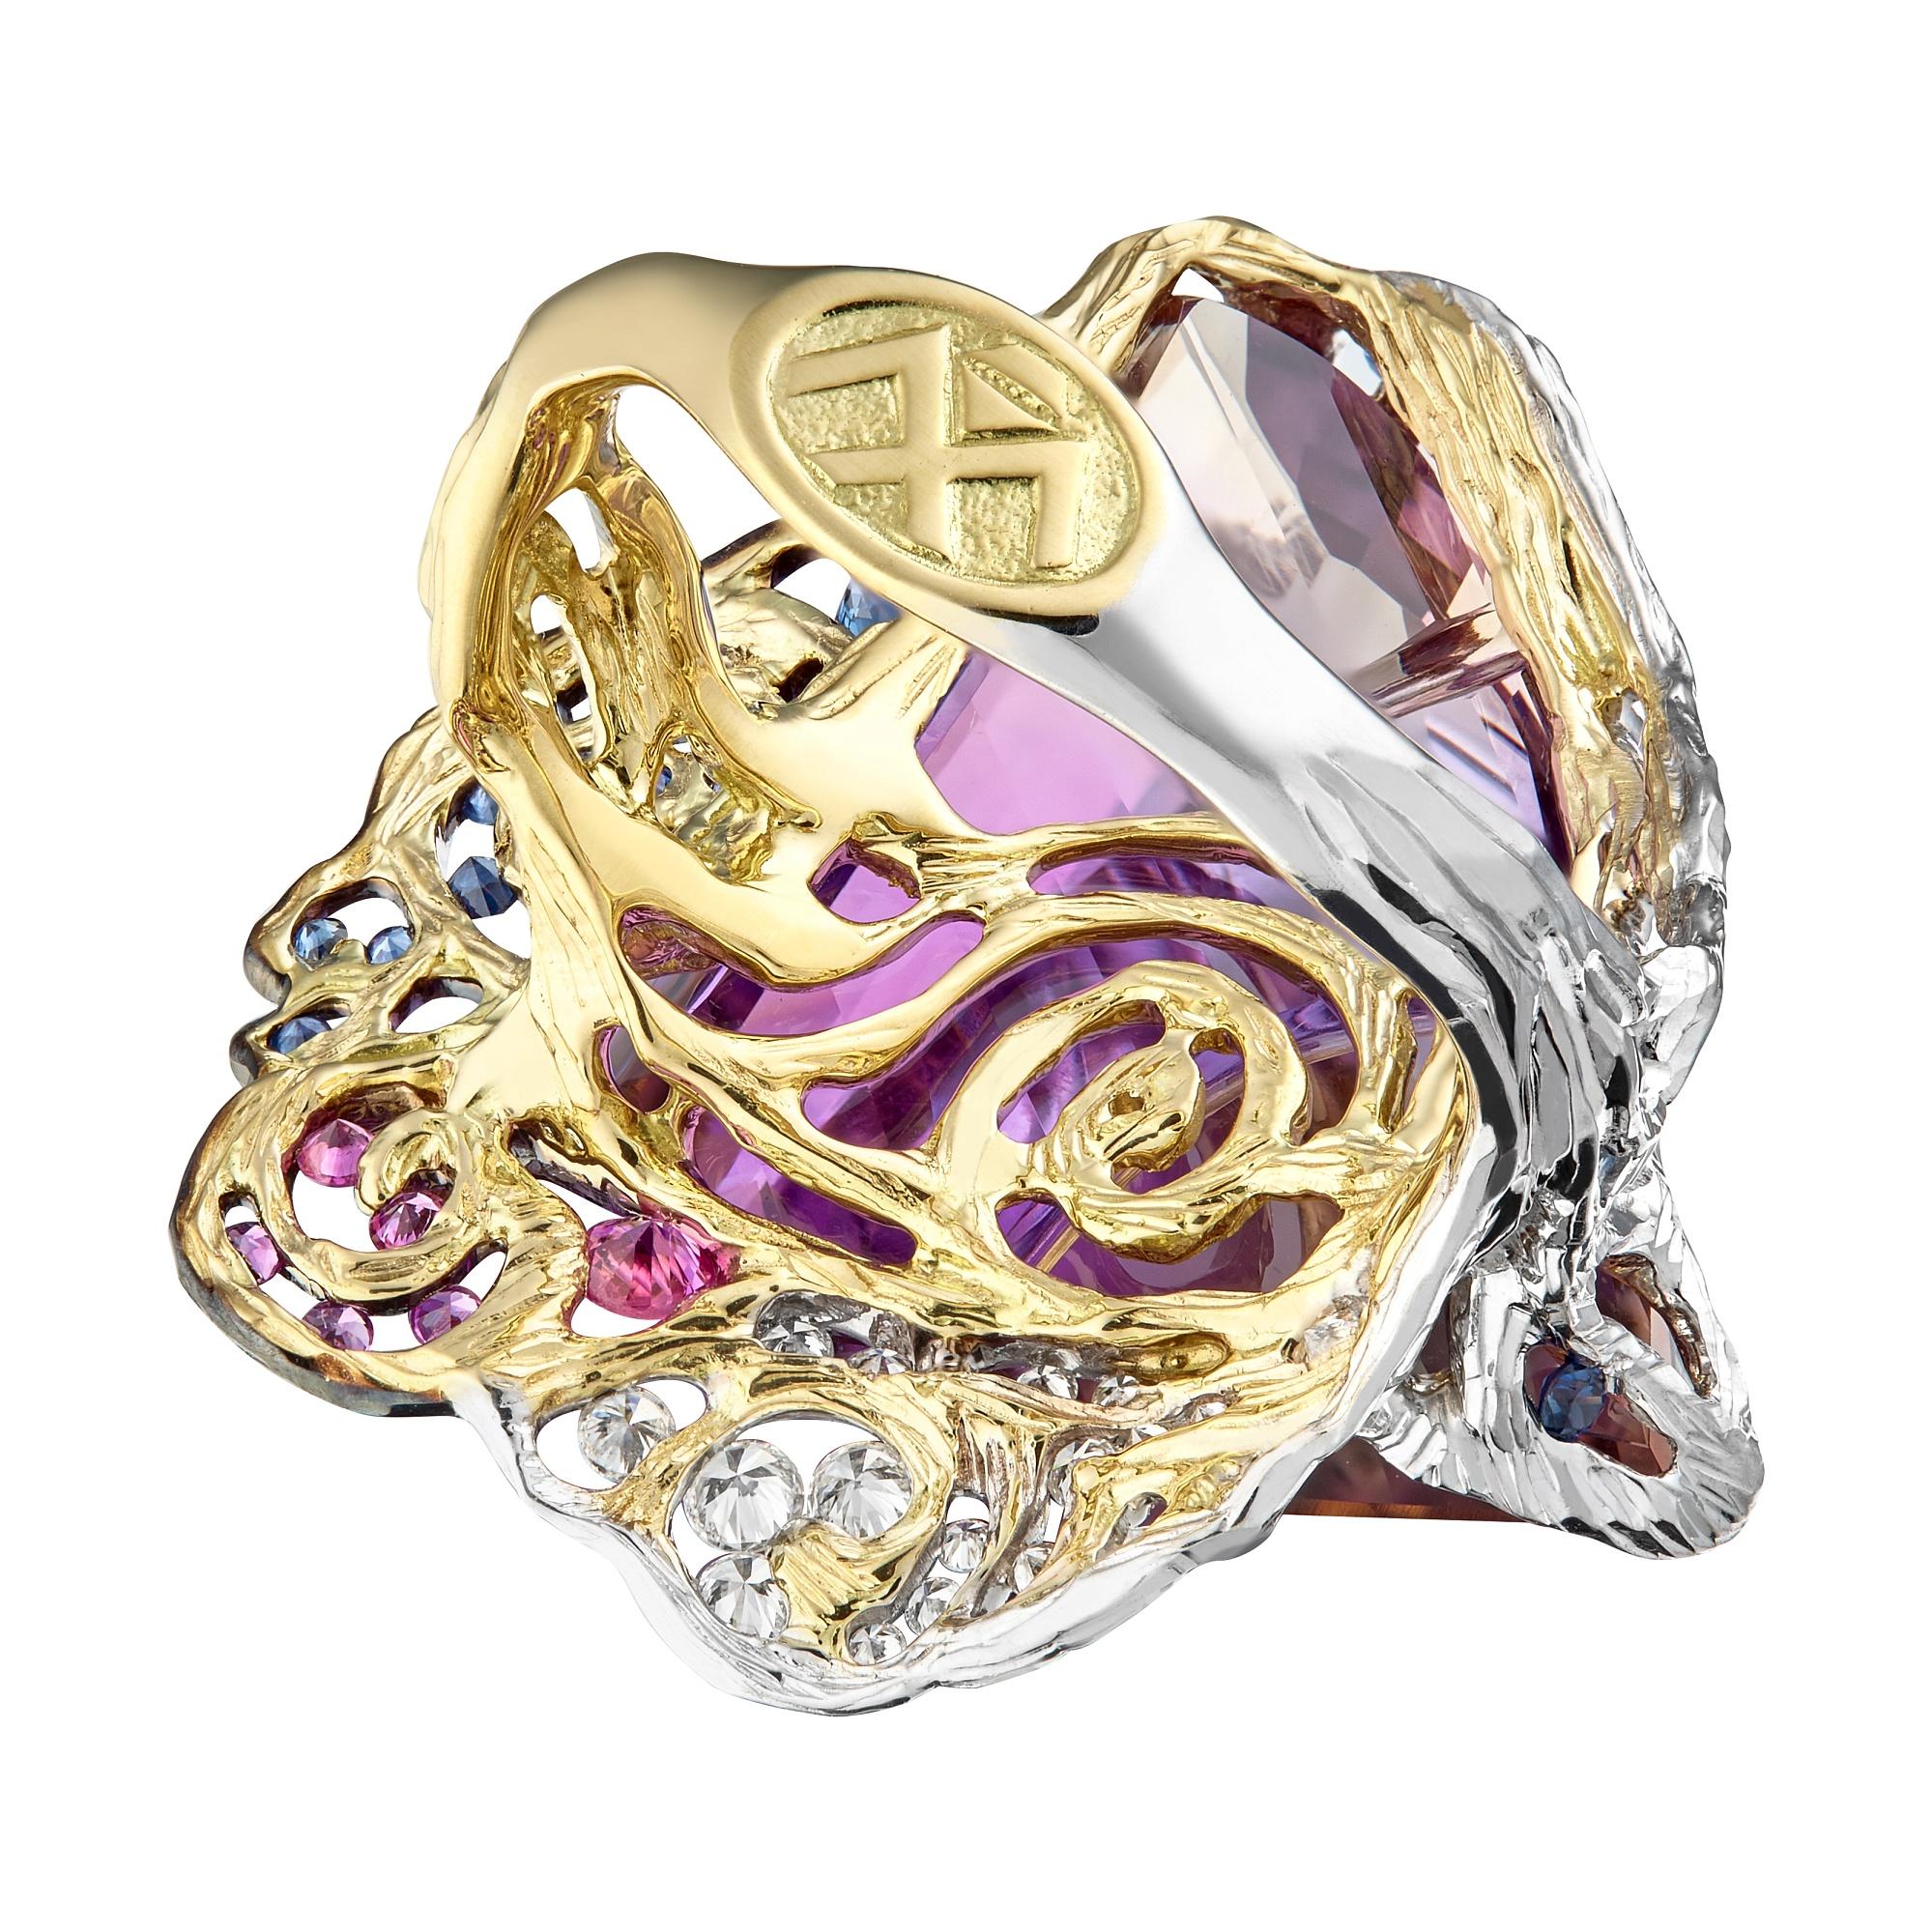 This extraordinary creation with gold, diamonds, sapphires, and fancy cut ametrine draws inspiration from none other than Van Gogh's masterpiece, 